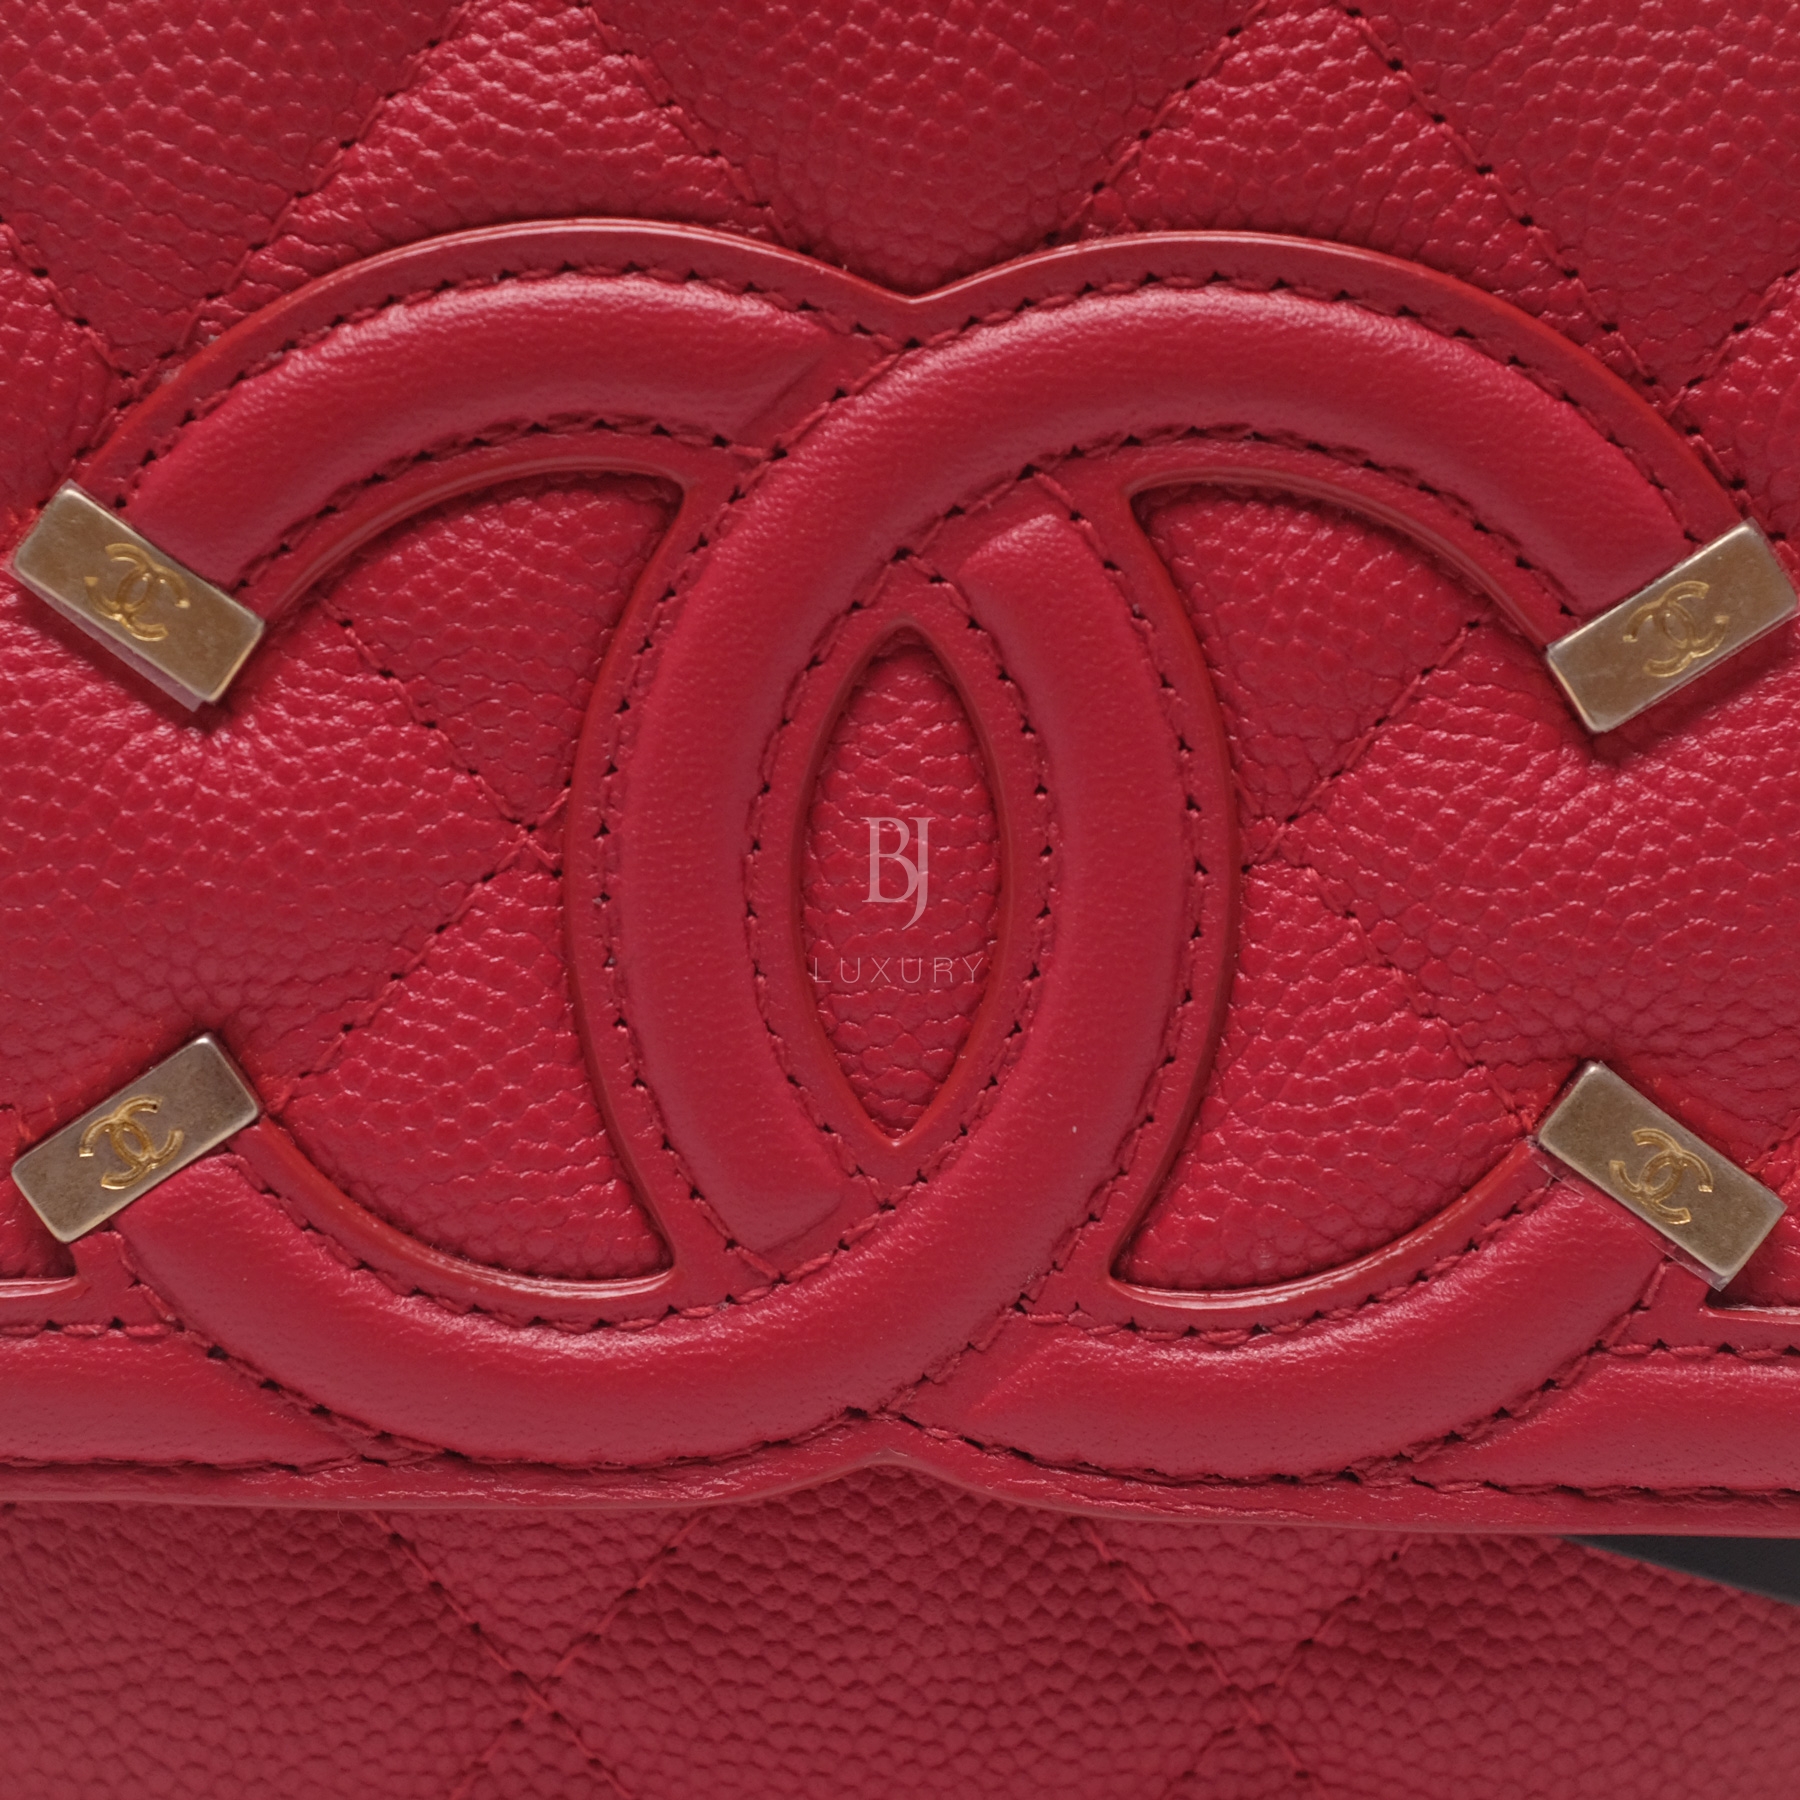 Chanel Wallet On Chain Red Caviar Brushed Gold BJ Luxury 11.jpg